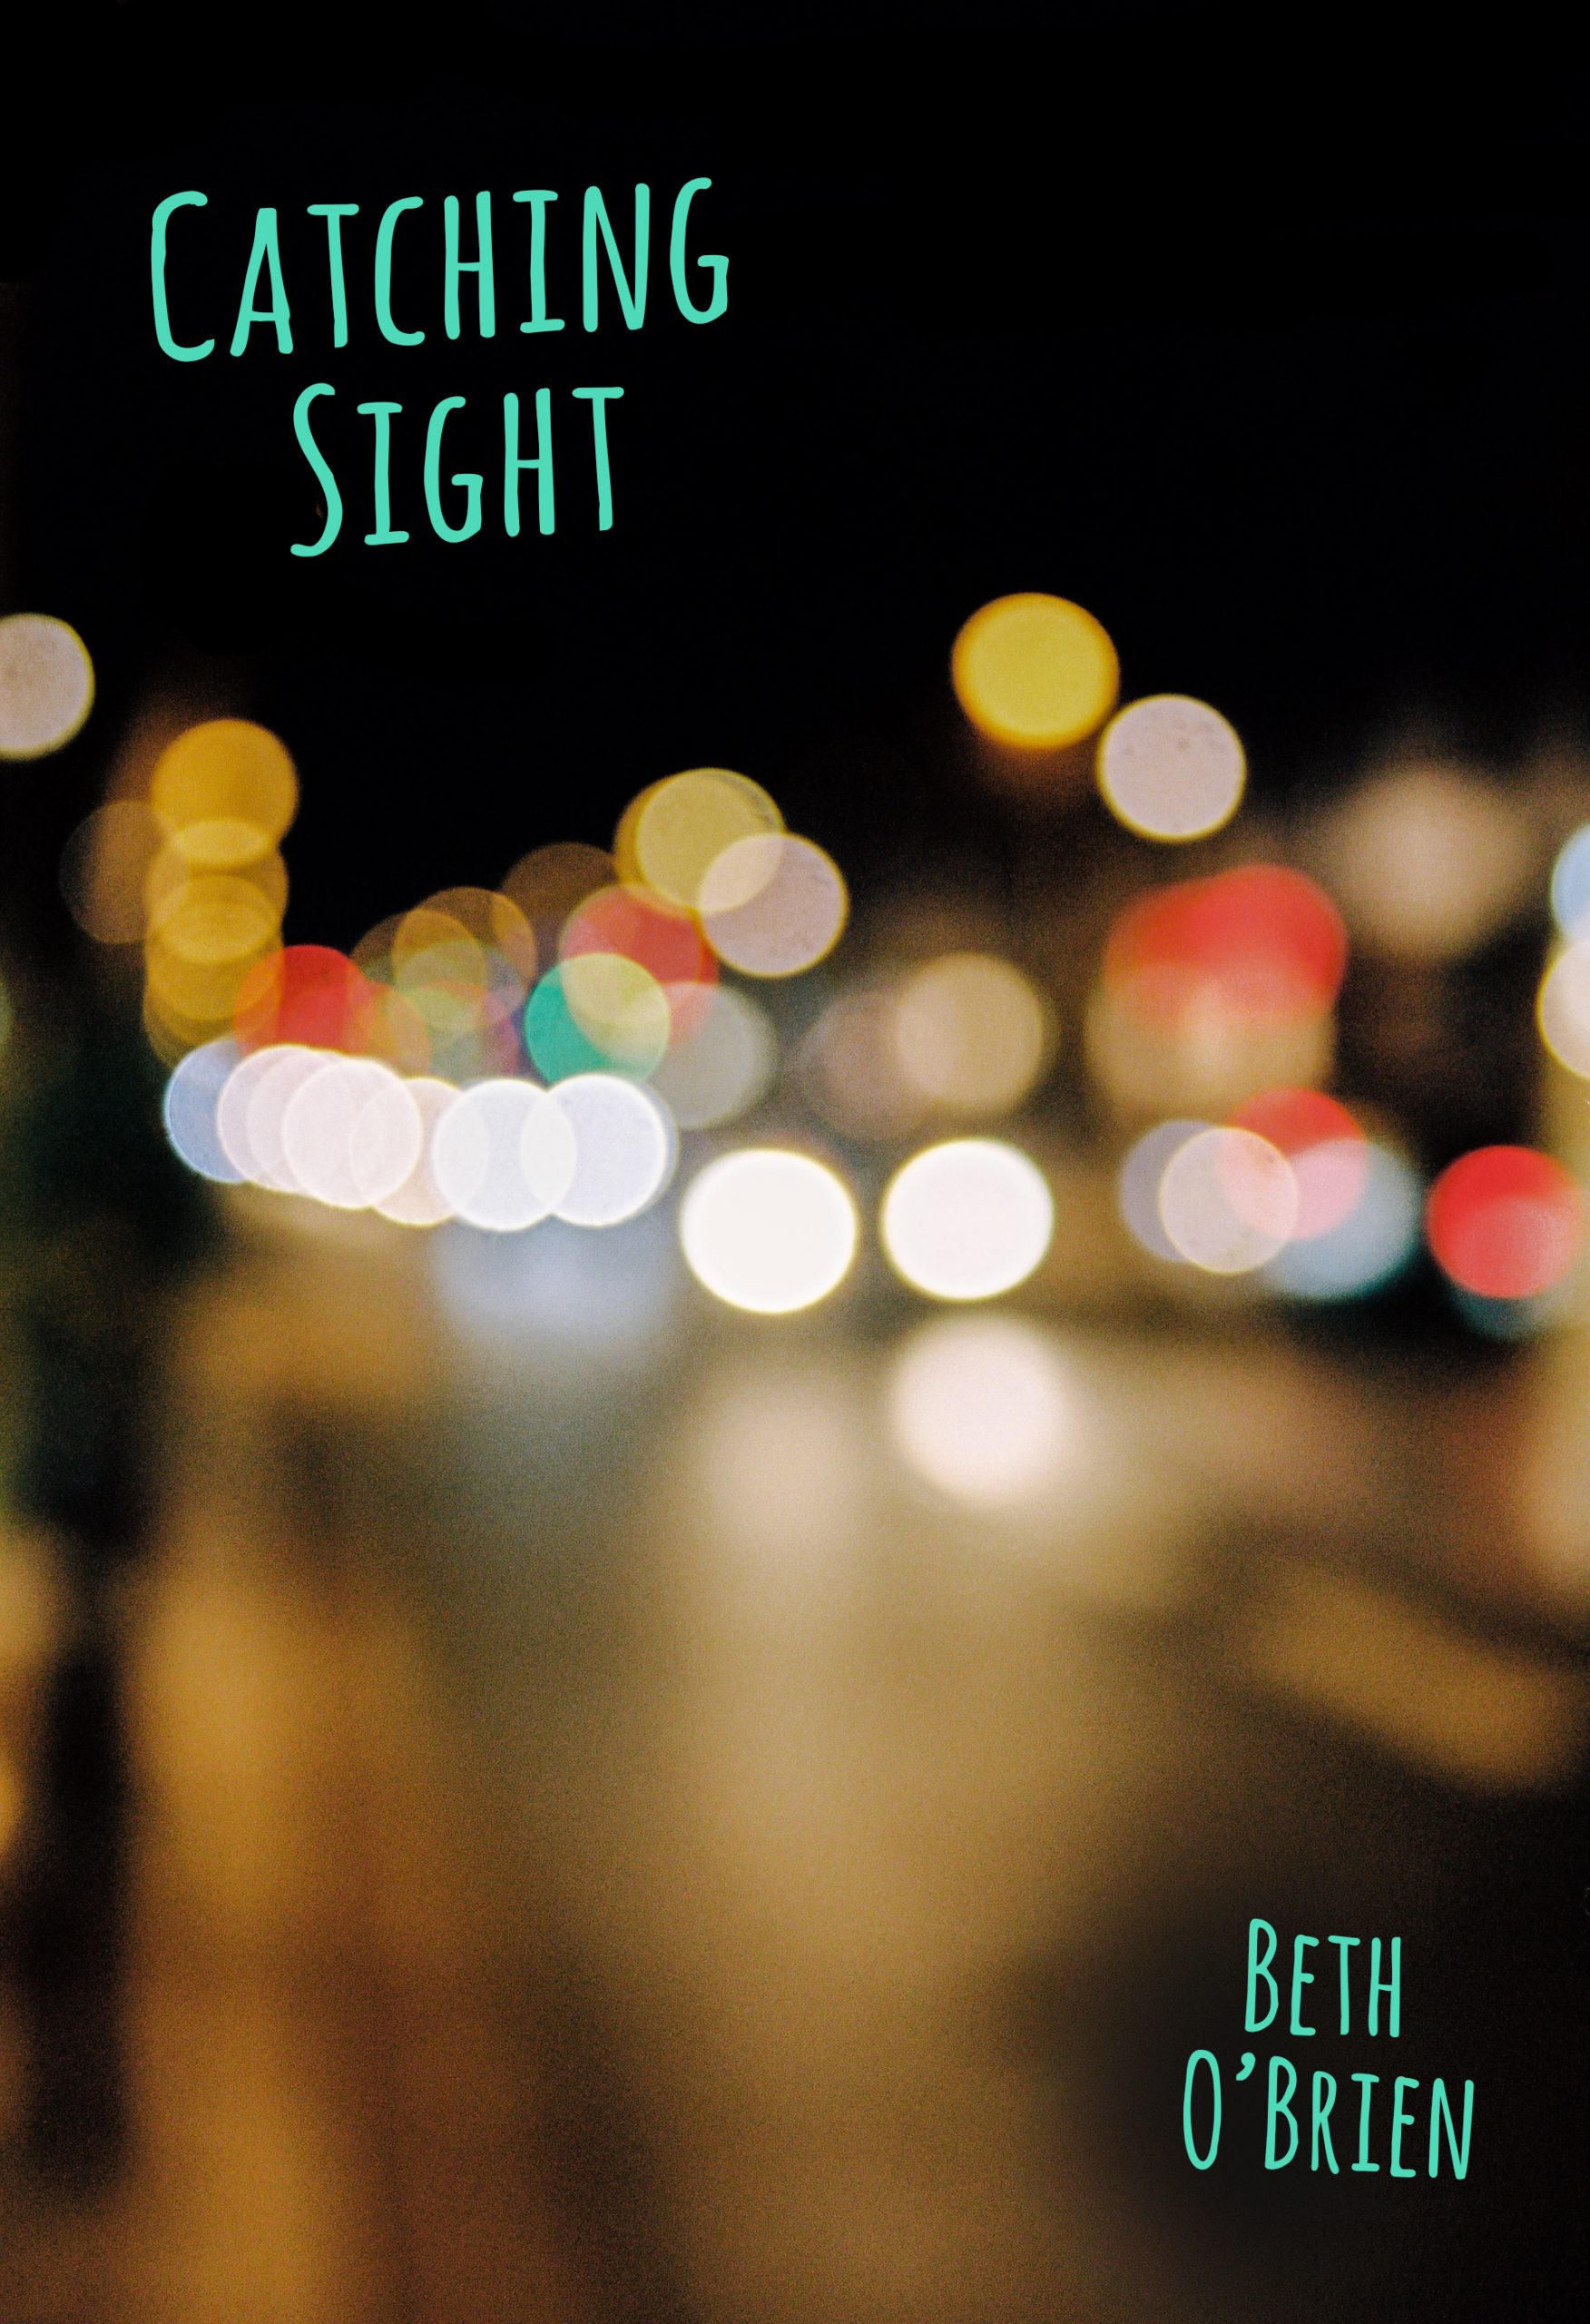 The cover for Catching Sight by Beth O'Brien. A street at night with blurred, multi-colored lights. The text in blue says “CATCHING SIGHT” at the top left at an angle, and “BETH O’BRIEN” toward the bottom right